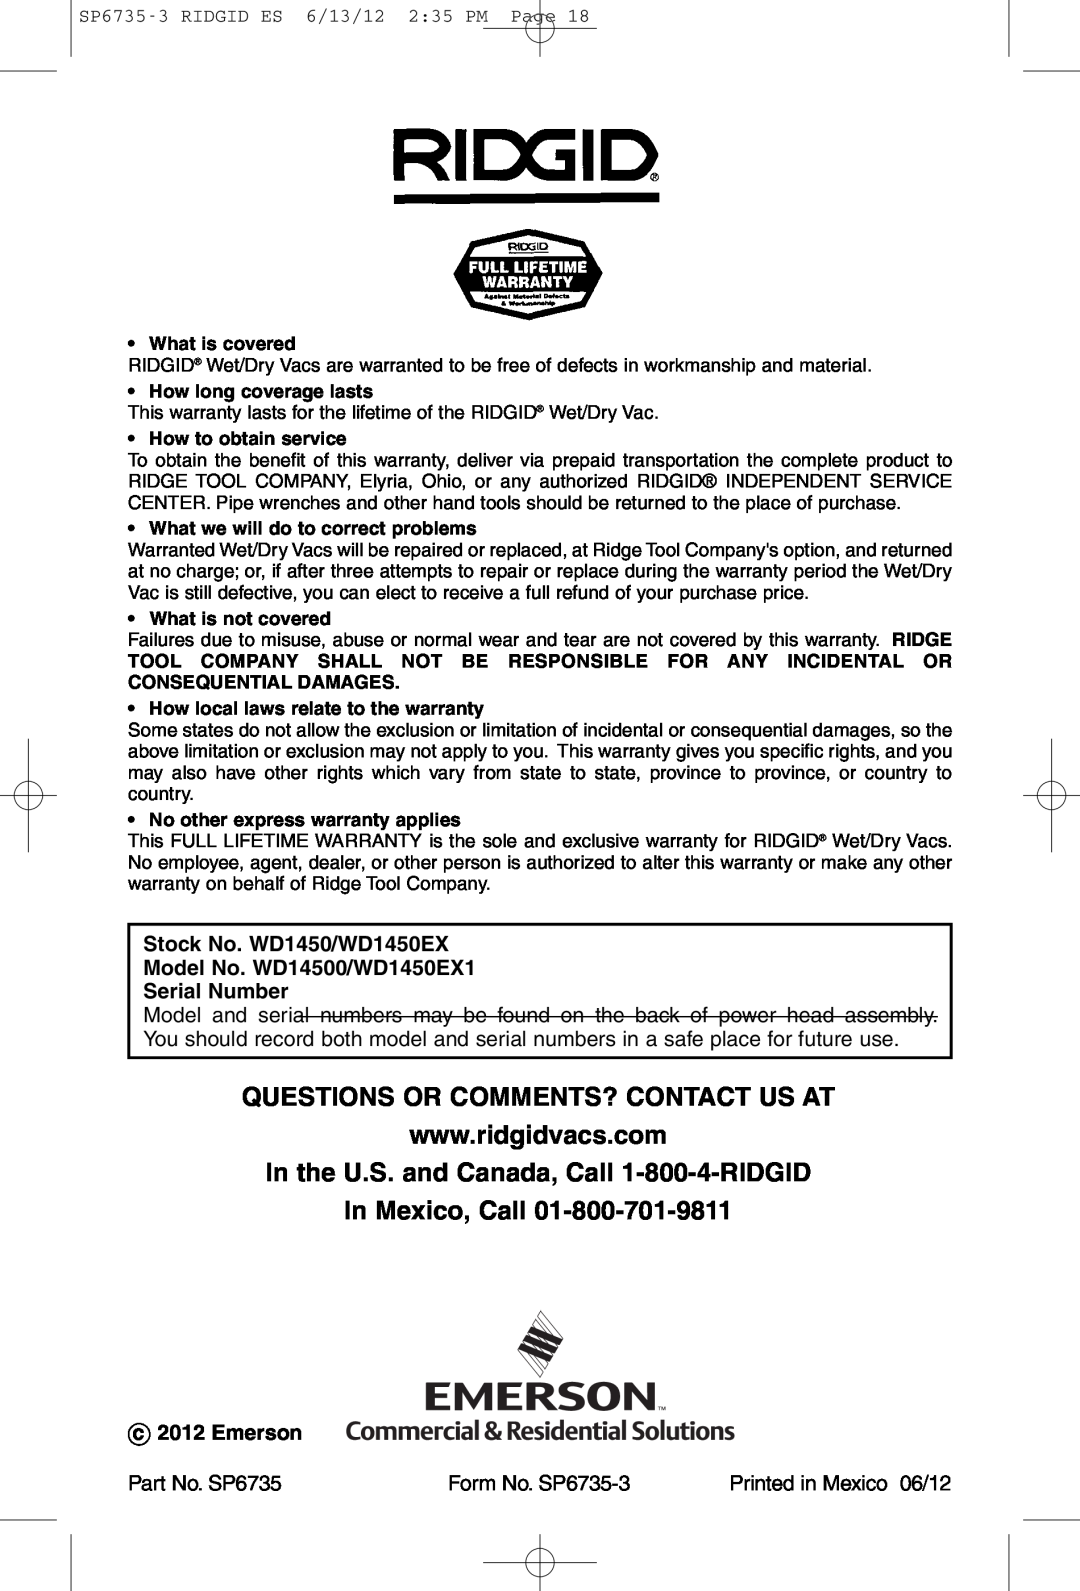 RIDGID WD14500 owner manual Questions Or Comments? Contact Us At, In Mexico, Call, What is covered, How long coverage lasts 